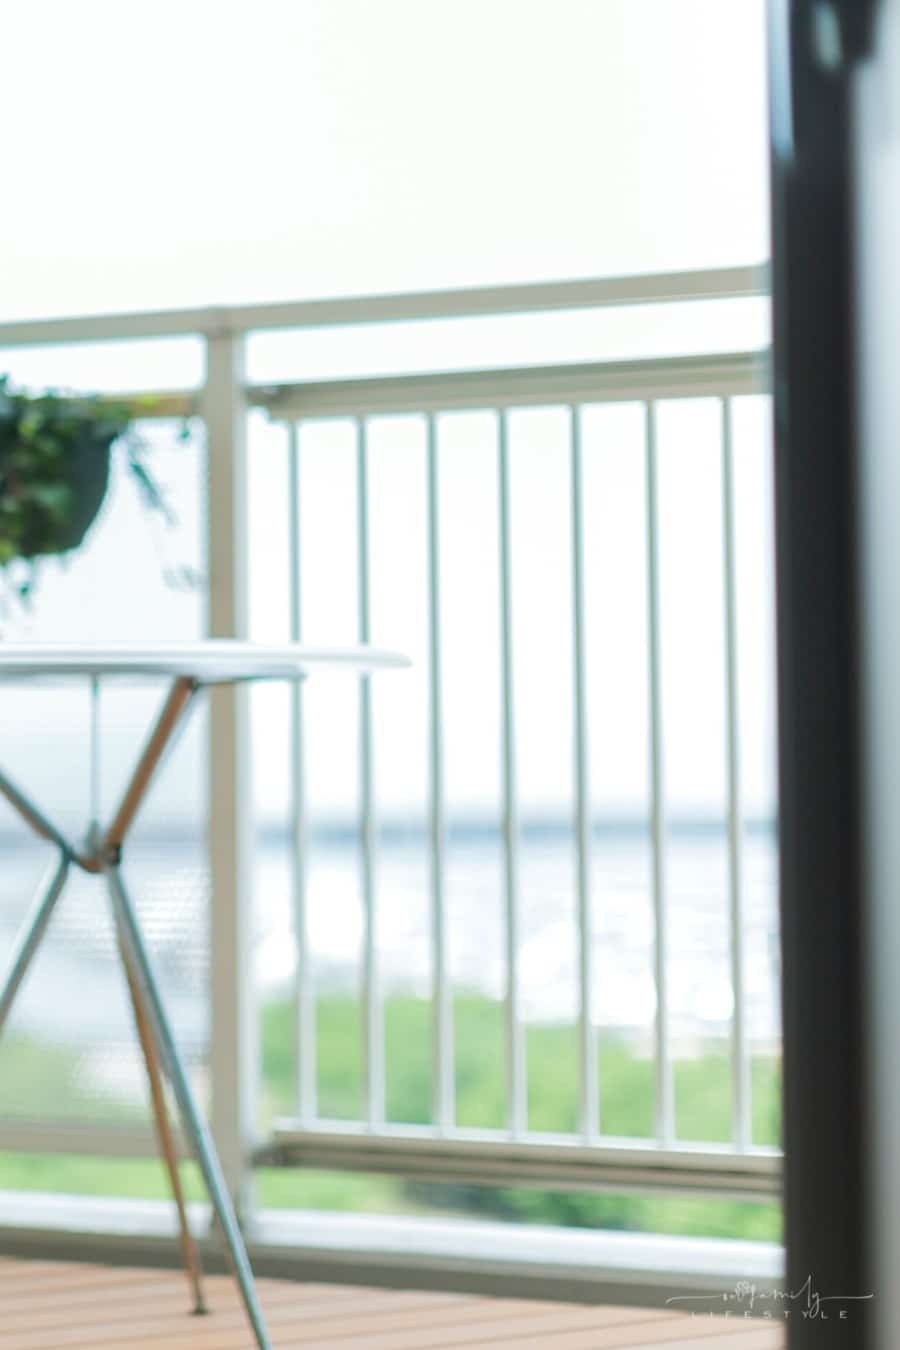 6 Important Things You Should Know About Balcony Inspection Laws